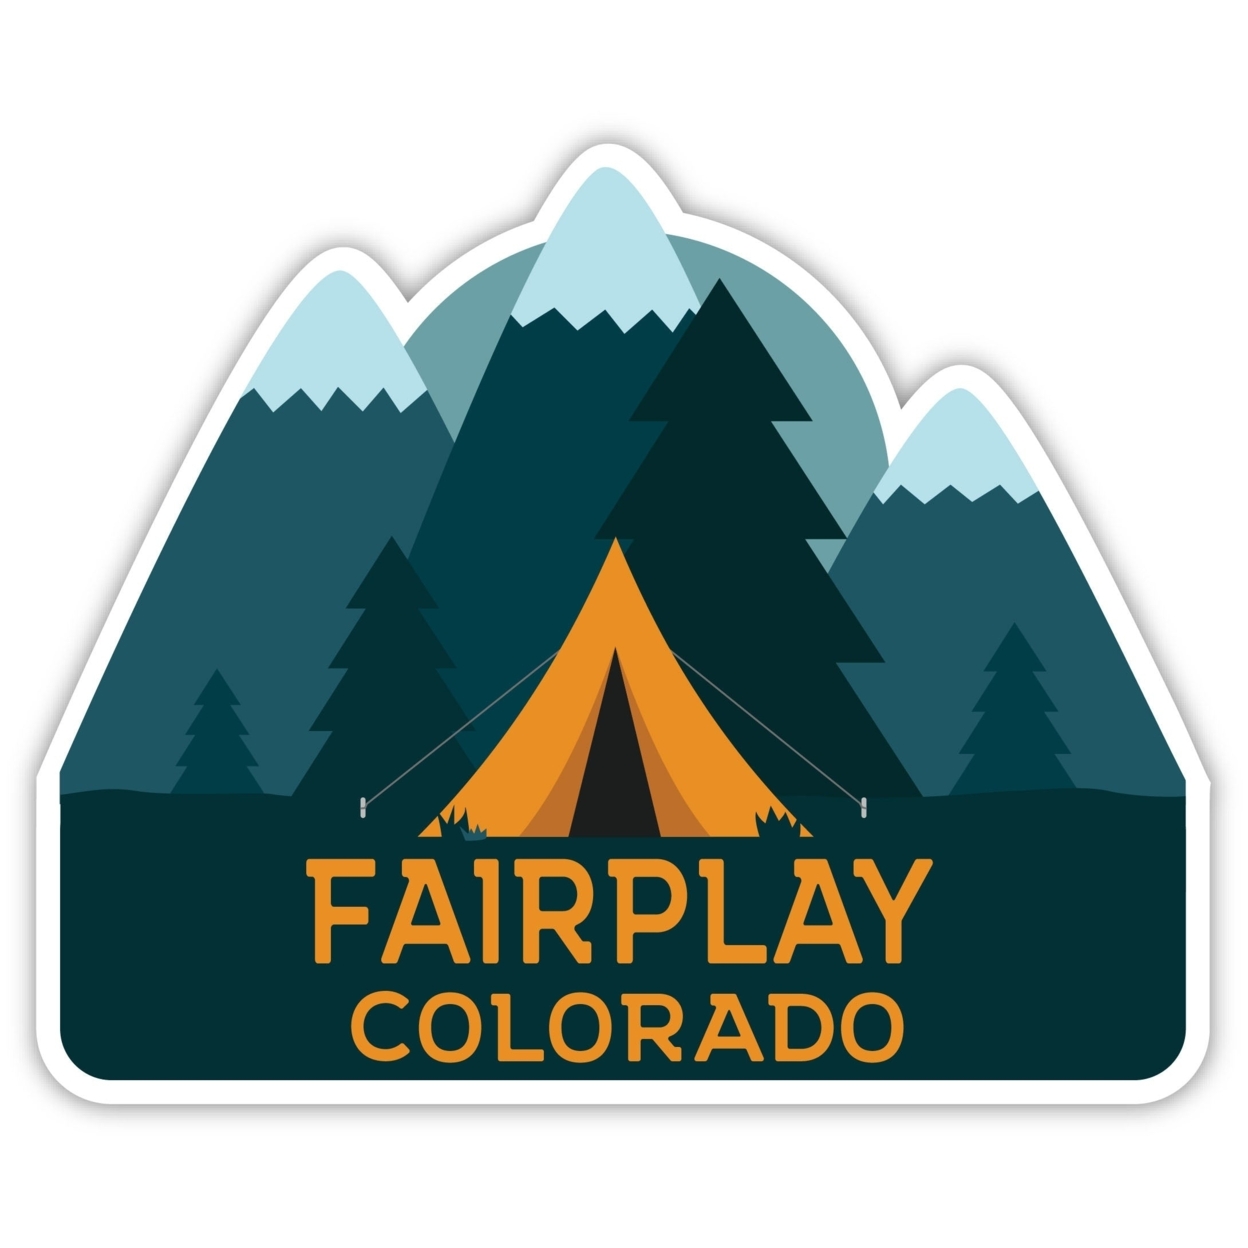 Fairplay Colorado Souvenir Decorative Stickers (Choose Theme And Size) - 4-Pack, 12-Inch, Tent